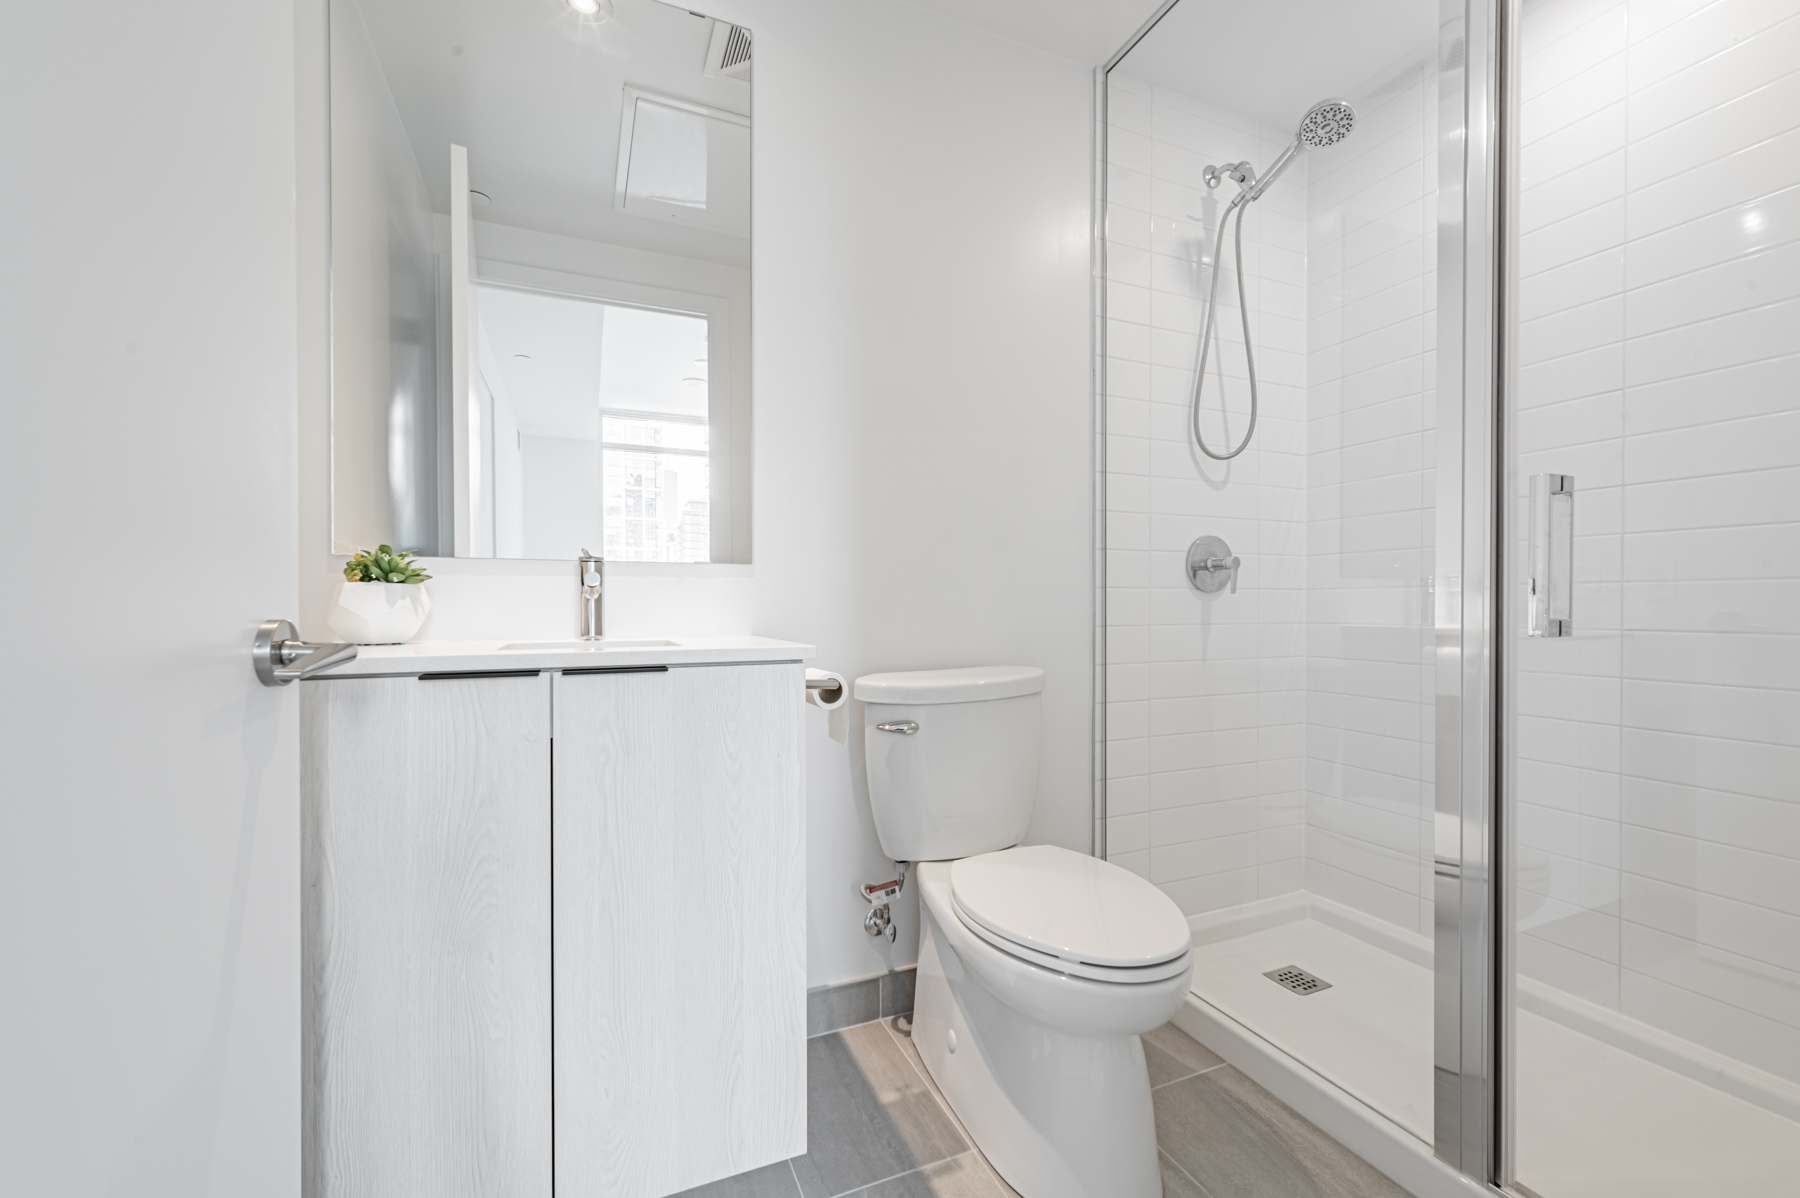 Ensuite bath with new tiles and walk in shower with glass door – 50 Power St Unit 5808.